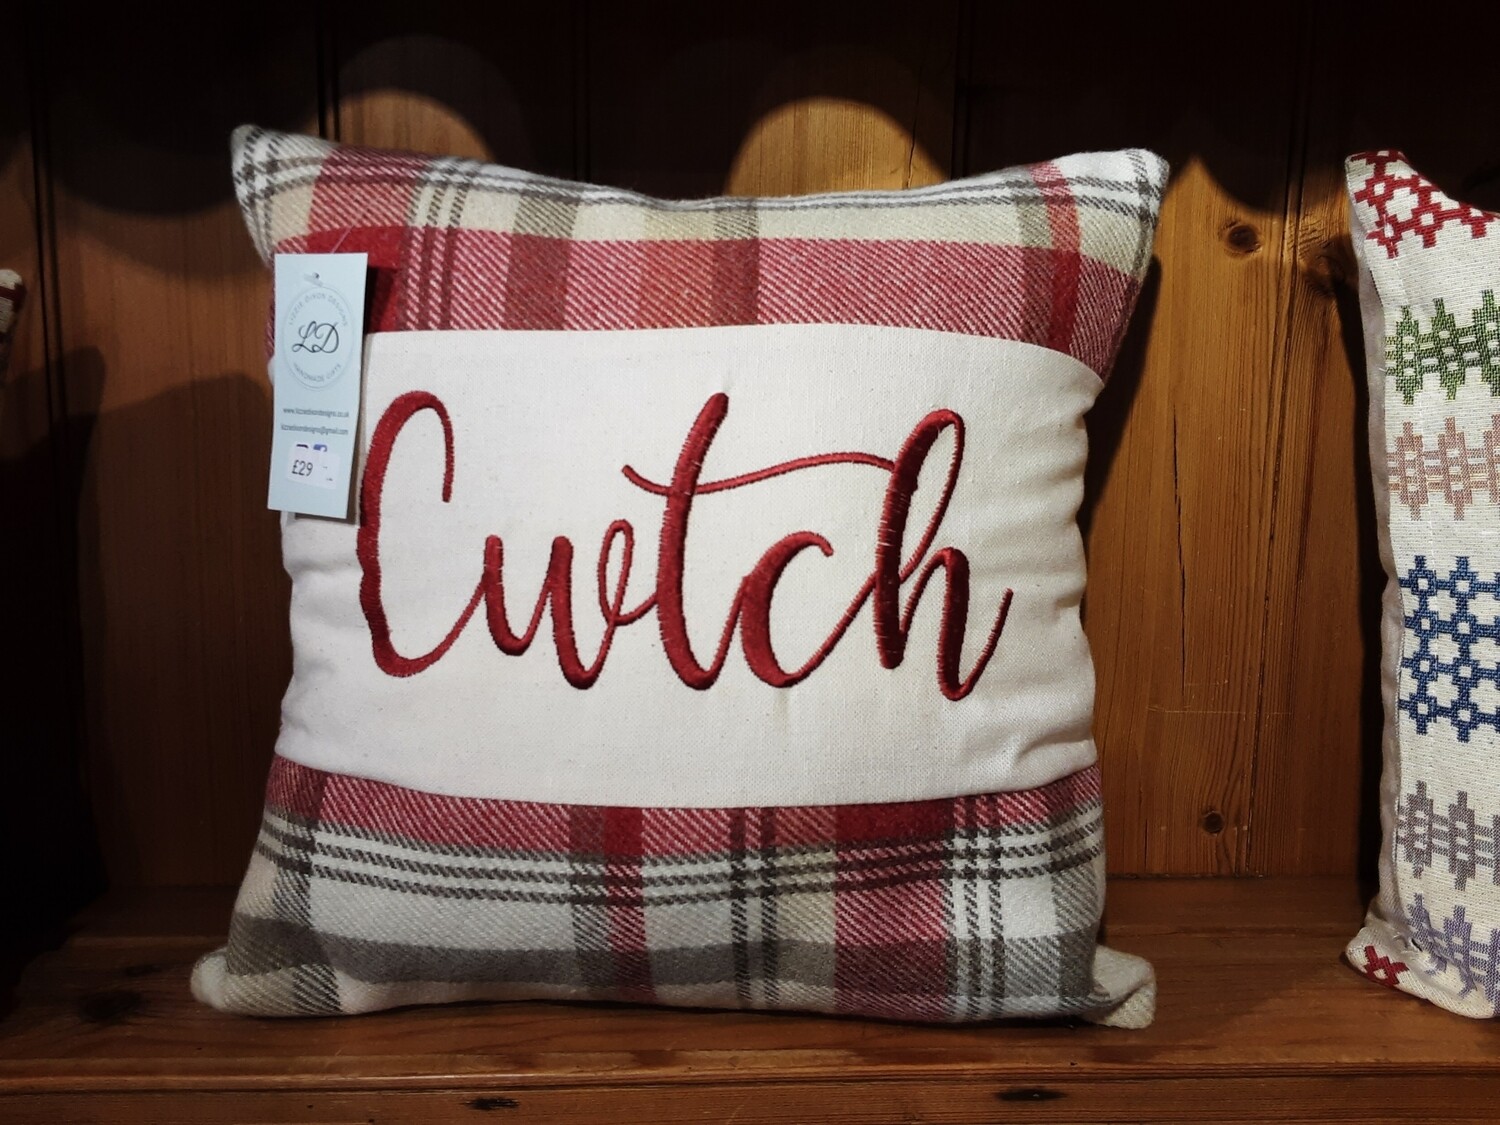 Country check Cwtch cushion